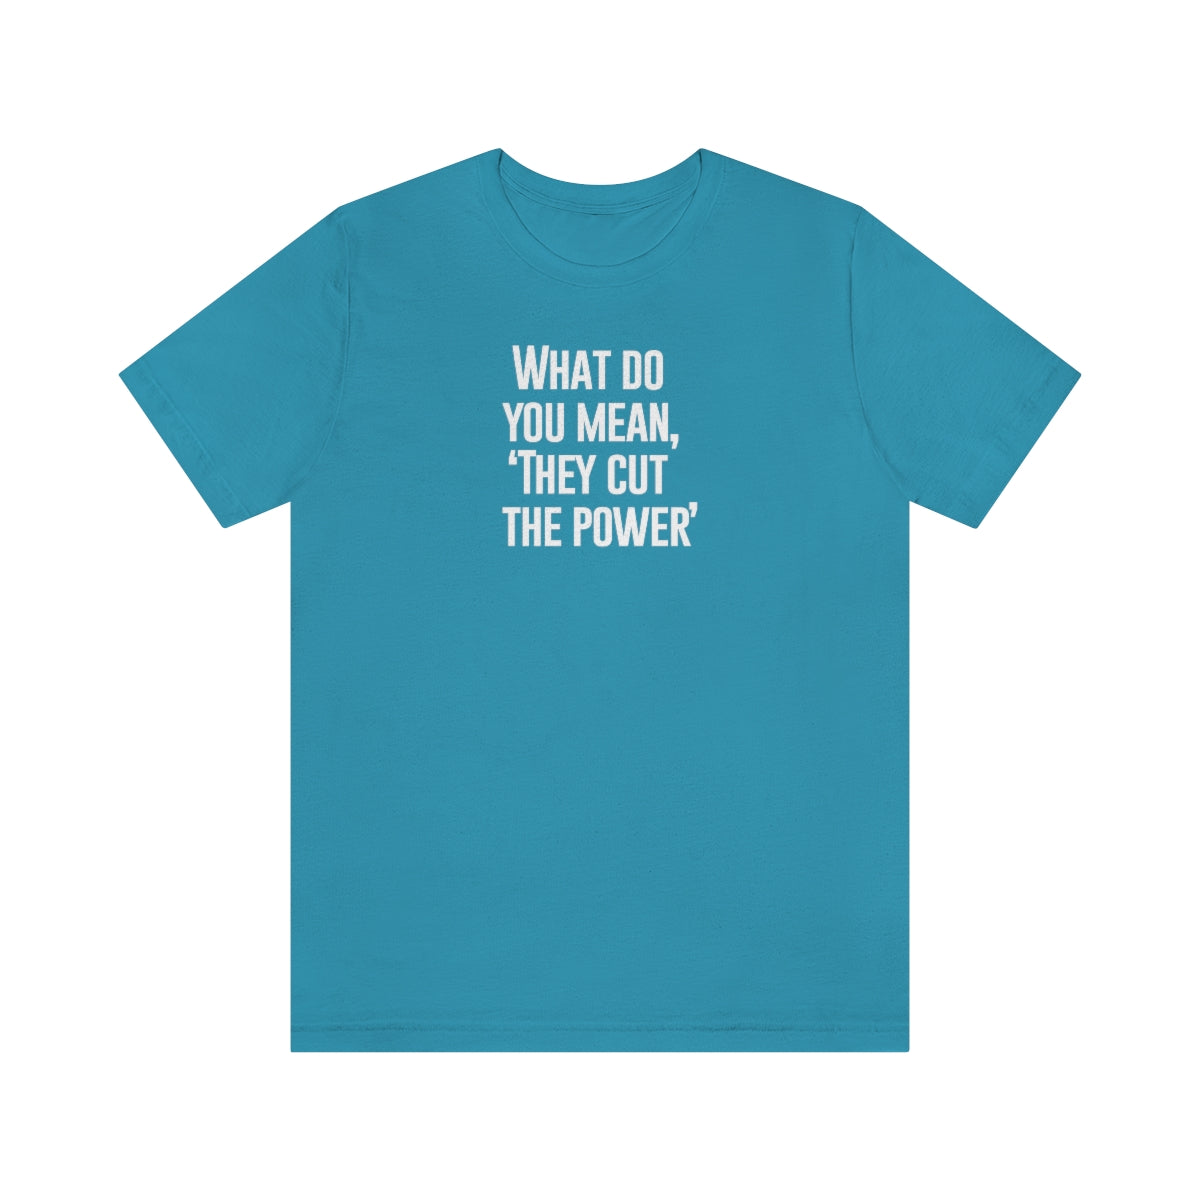 What do you mean they cut the power t-shirt